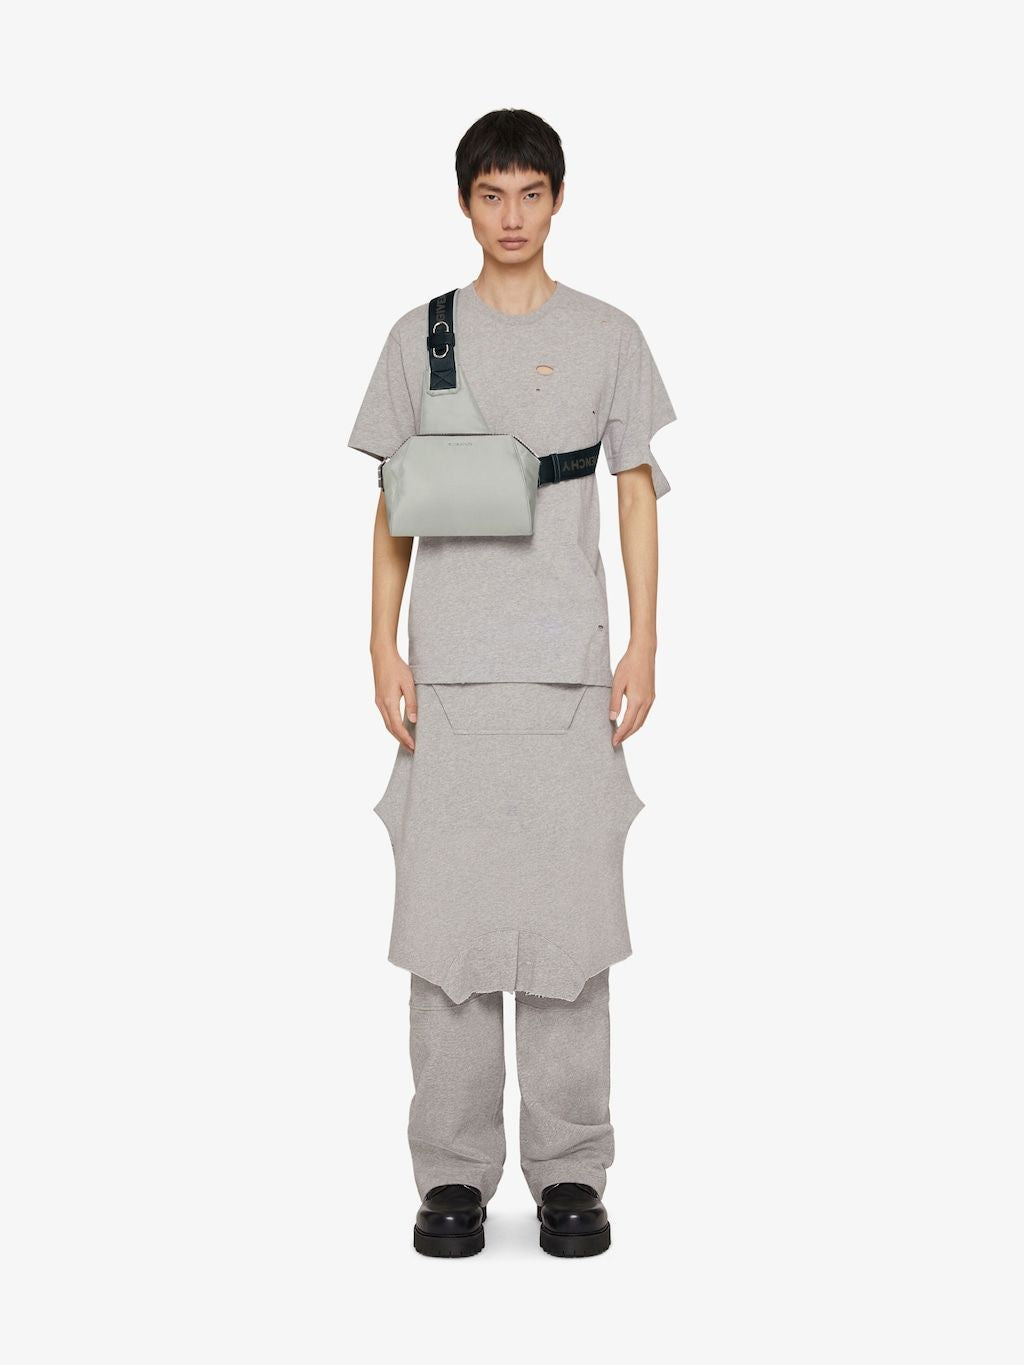 Crossbody Bag with Tech Strap for Men - FW23 Collection